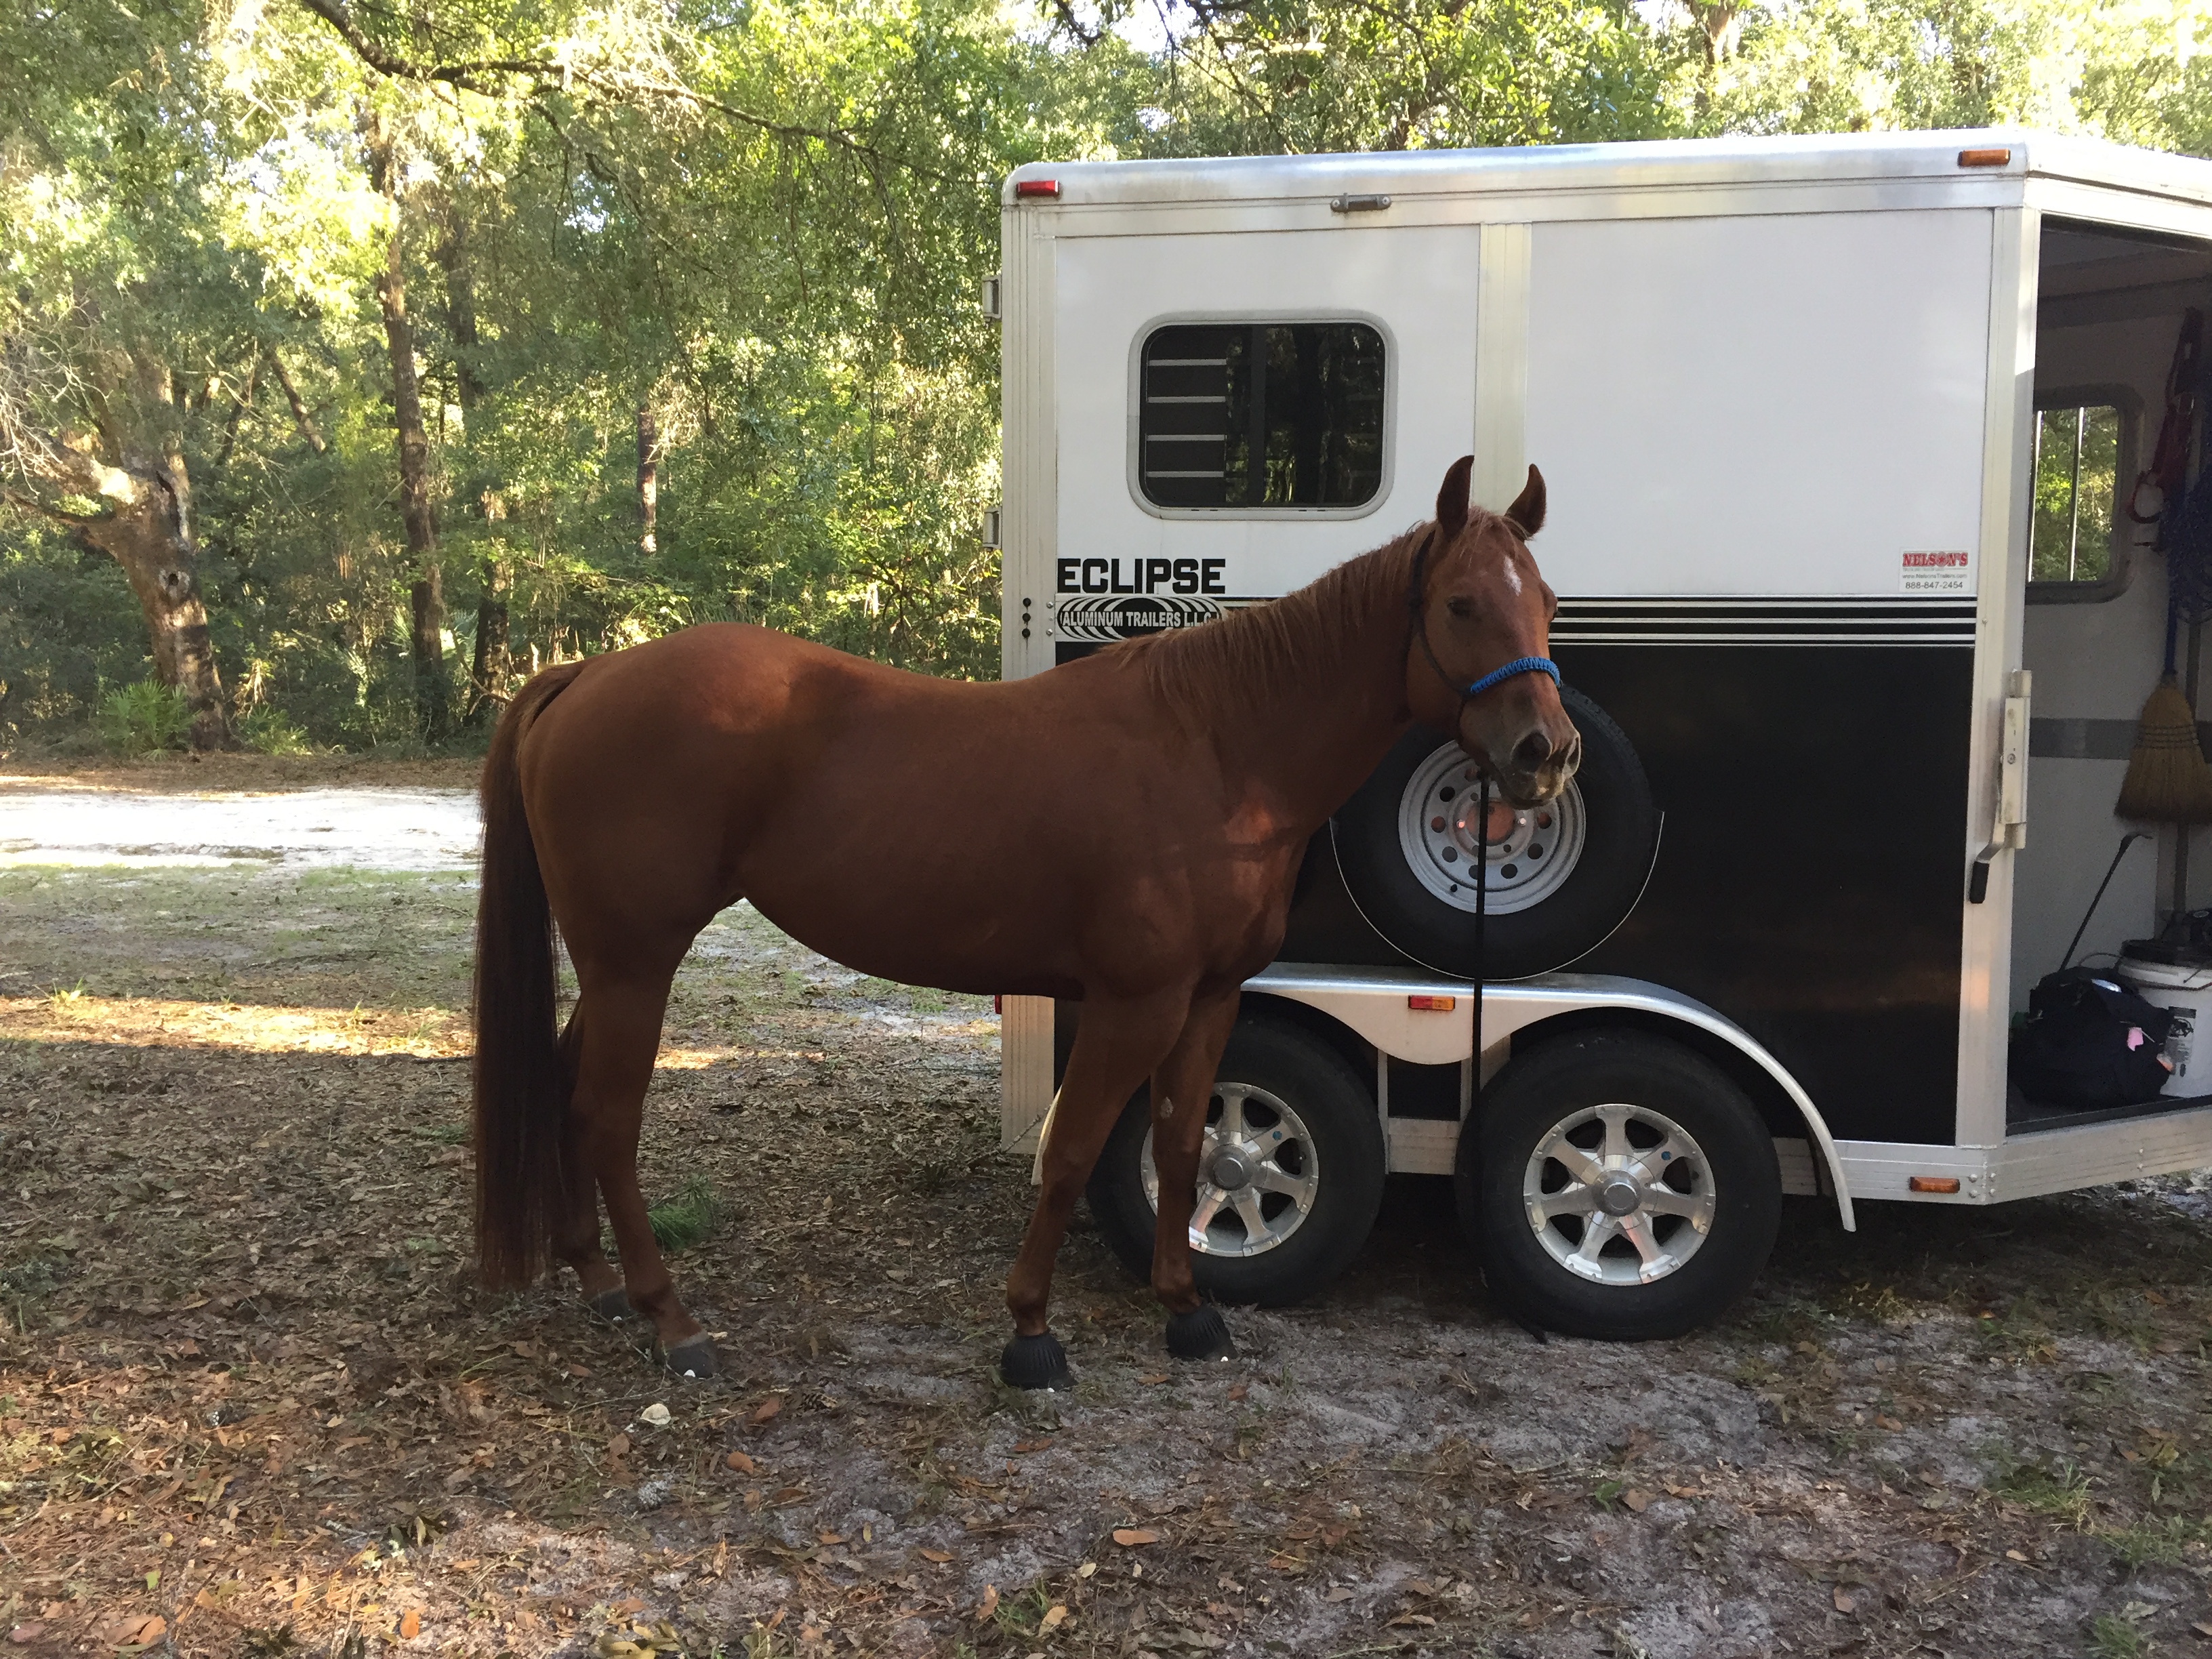 Bella waiting for a trail ride